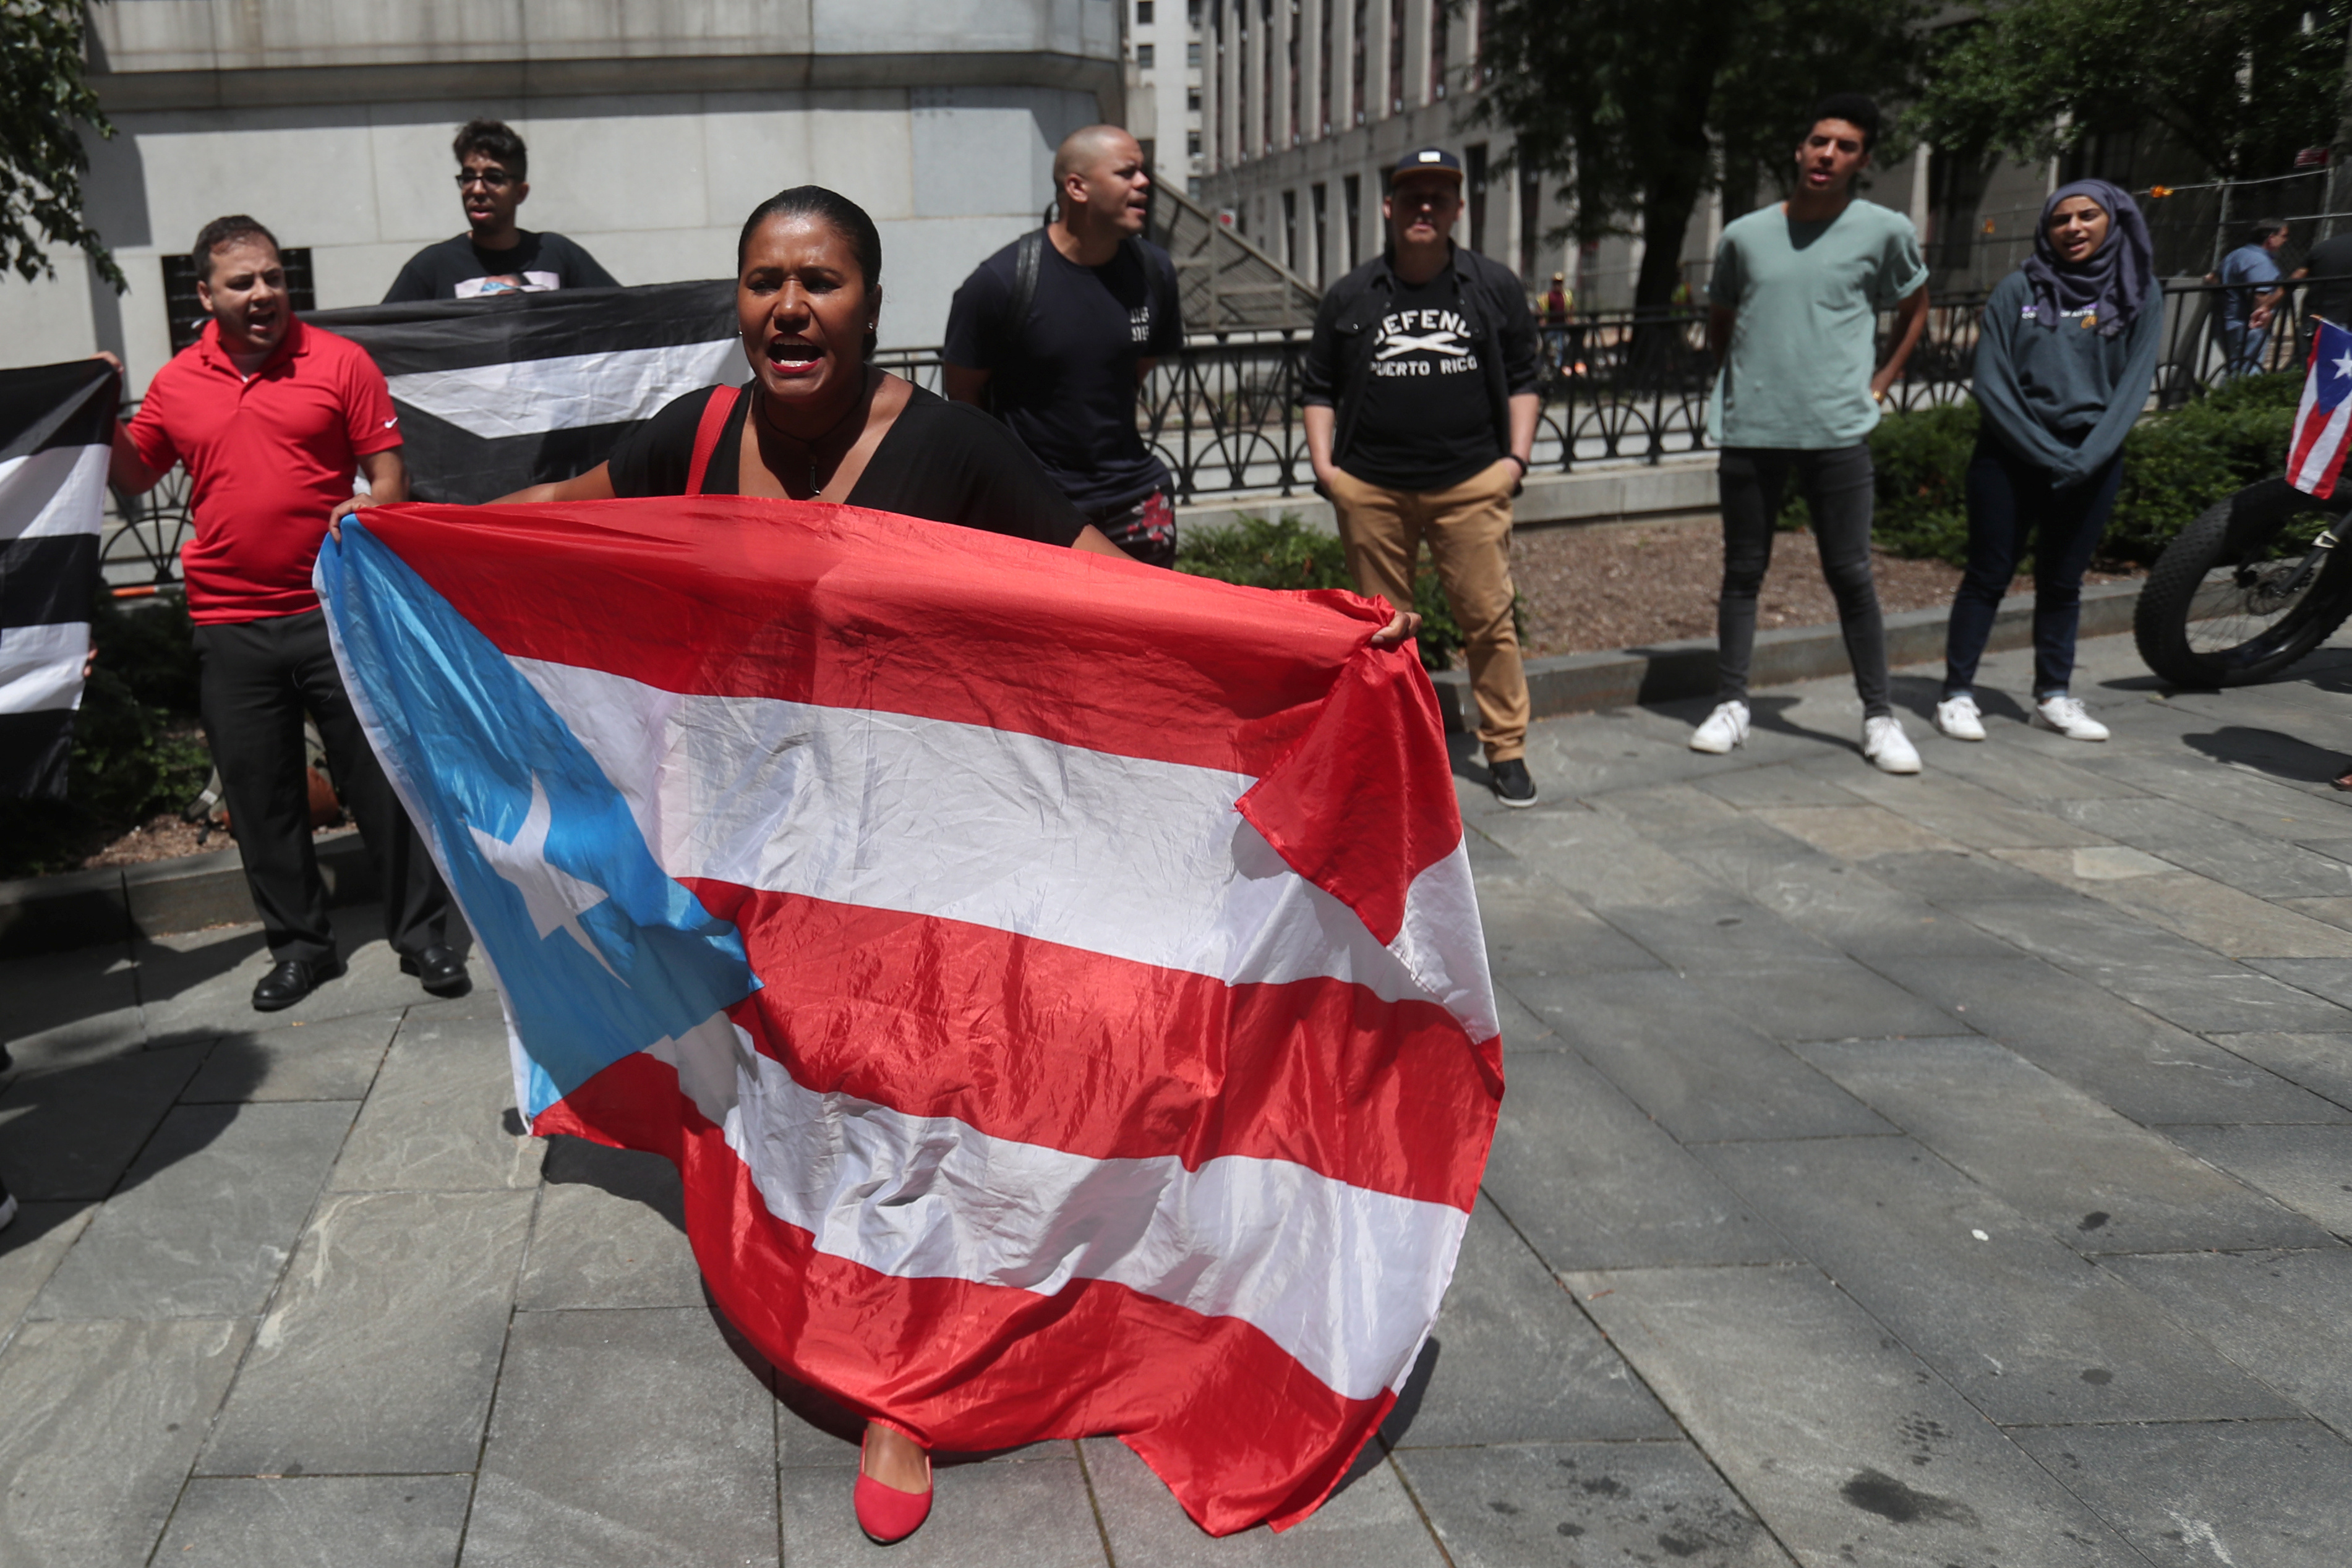 Demonstrators rally to cancel Puerto Rico's debt outside United States Court in the Manhattan borough of New York City